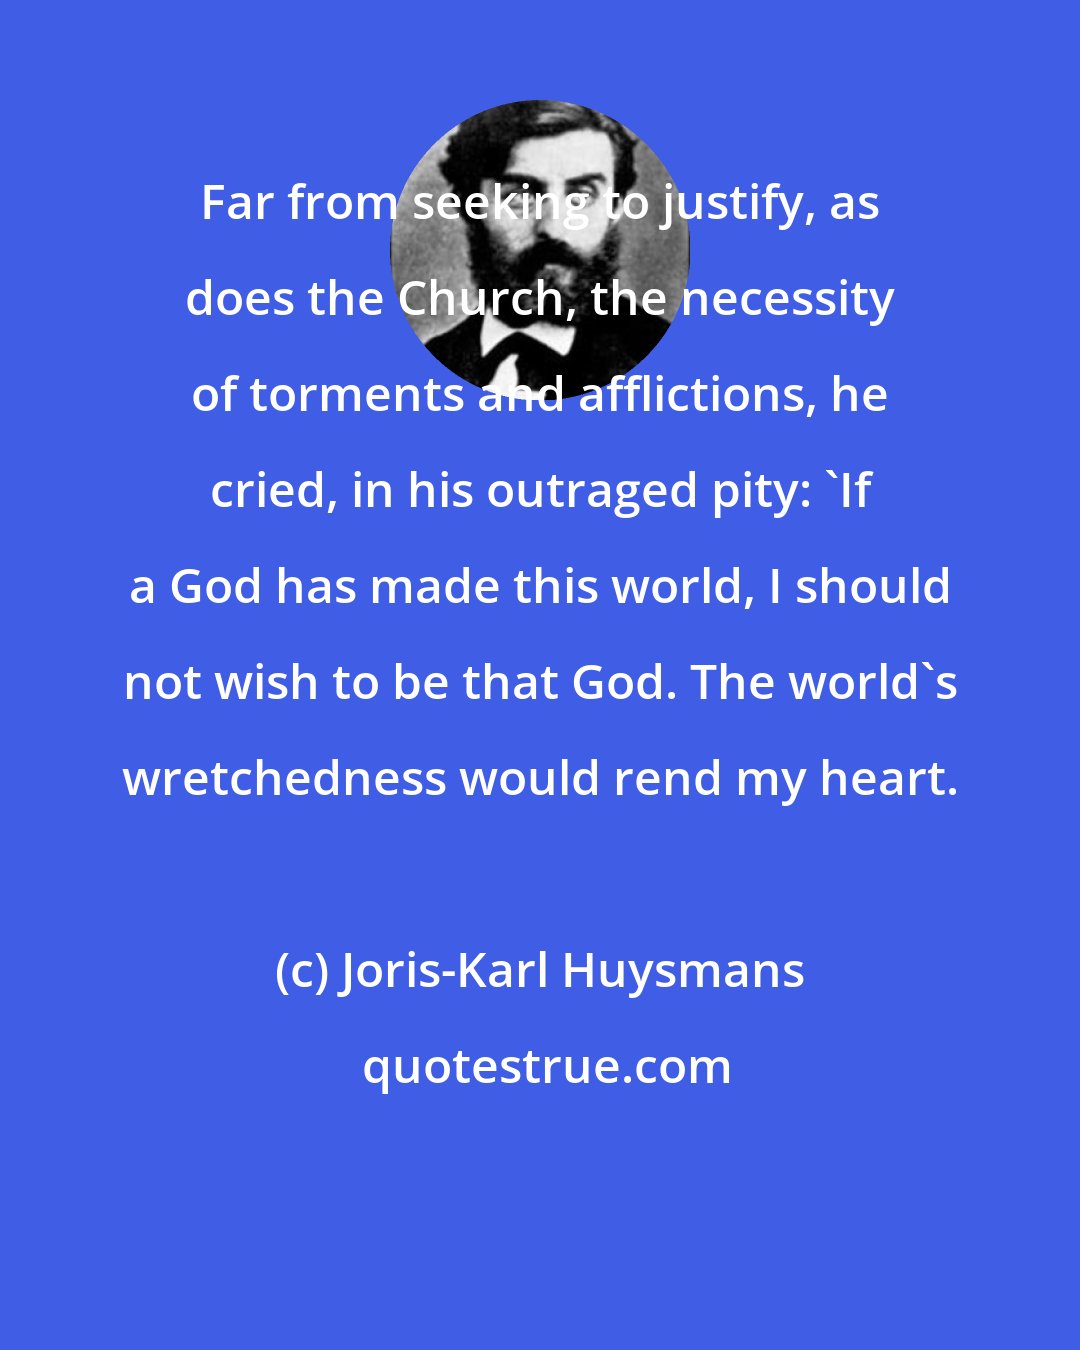 Joris-Karl Huysmans: Far from seeking to justify, as does the Church, the necessity of torments and afflictions, he cried, in his outraged pity: 'If a God has made this world, I should not wish to be that God. The world's wretchedness would rend my heart.